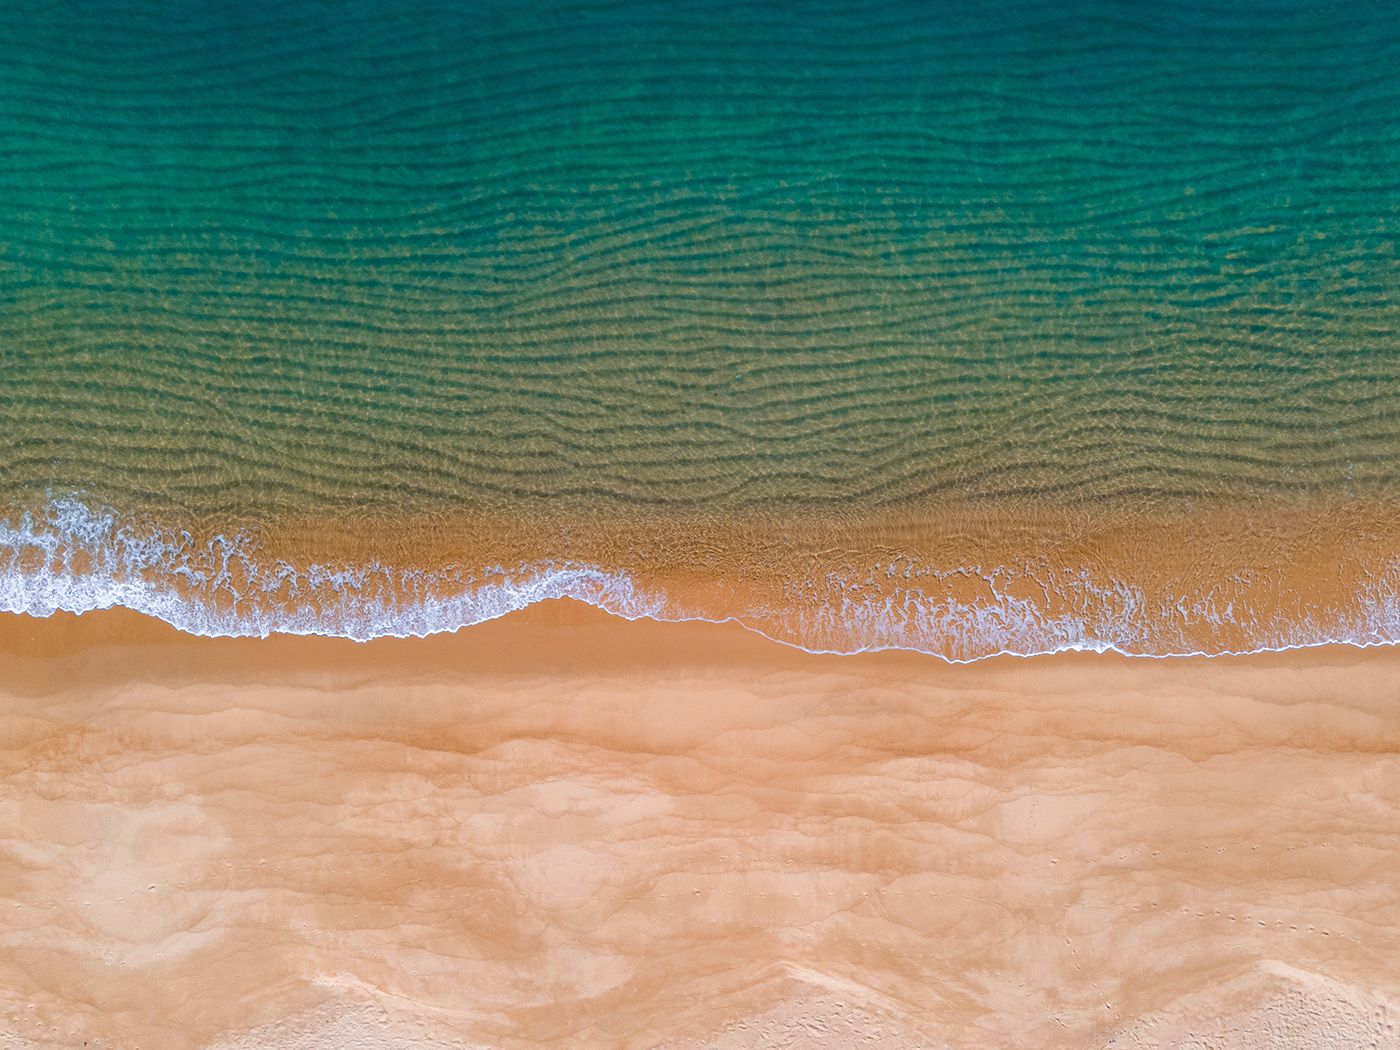 Aerial beach Brazil DJI drone Landscape Nature nature photography Photography  Travel